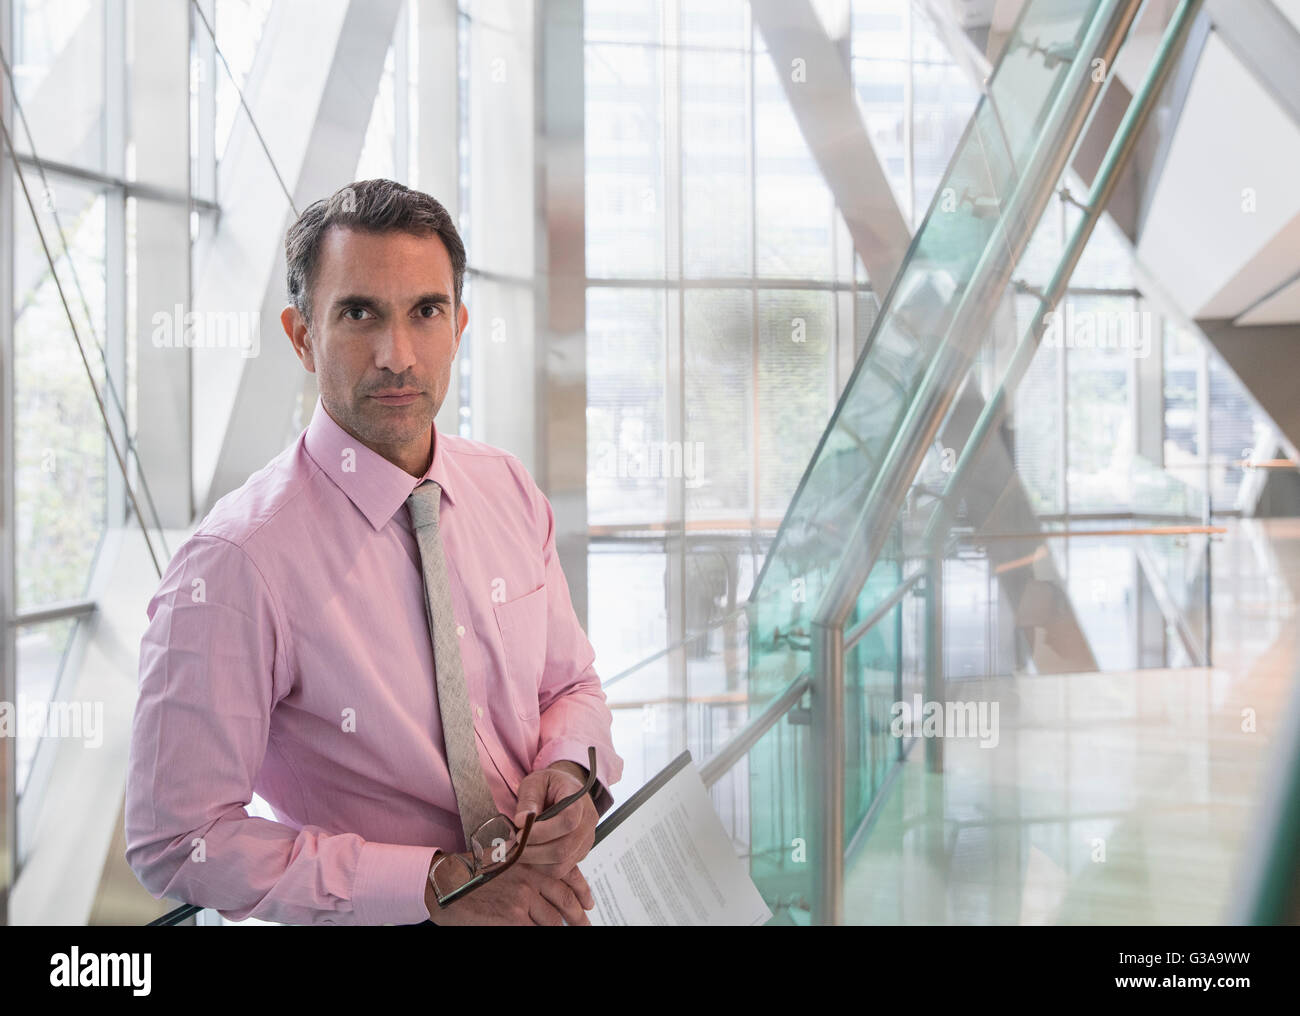 Portrait serious corporate businessman in modern office lobby Stock Photo